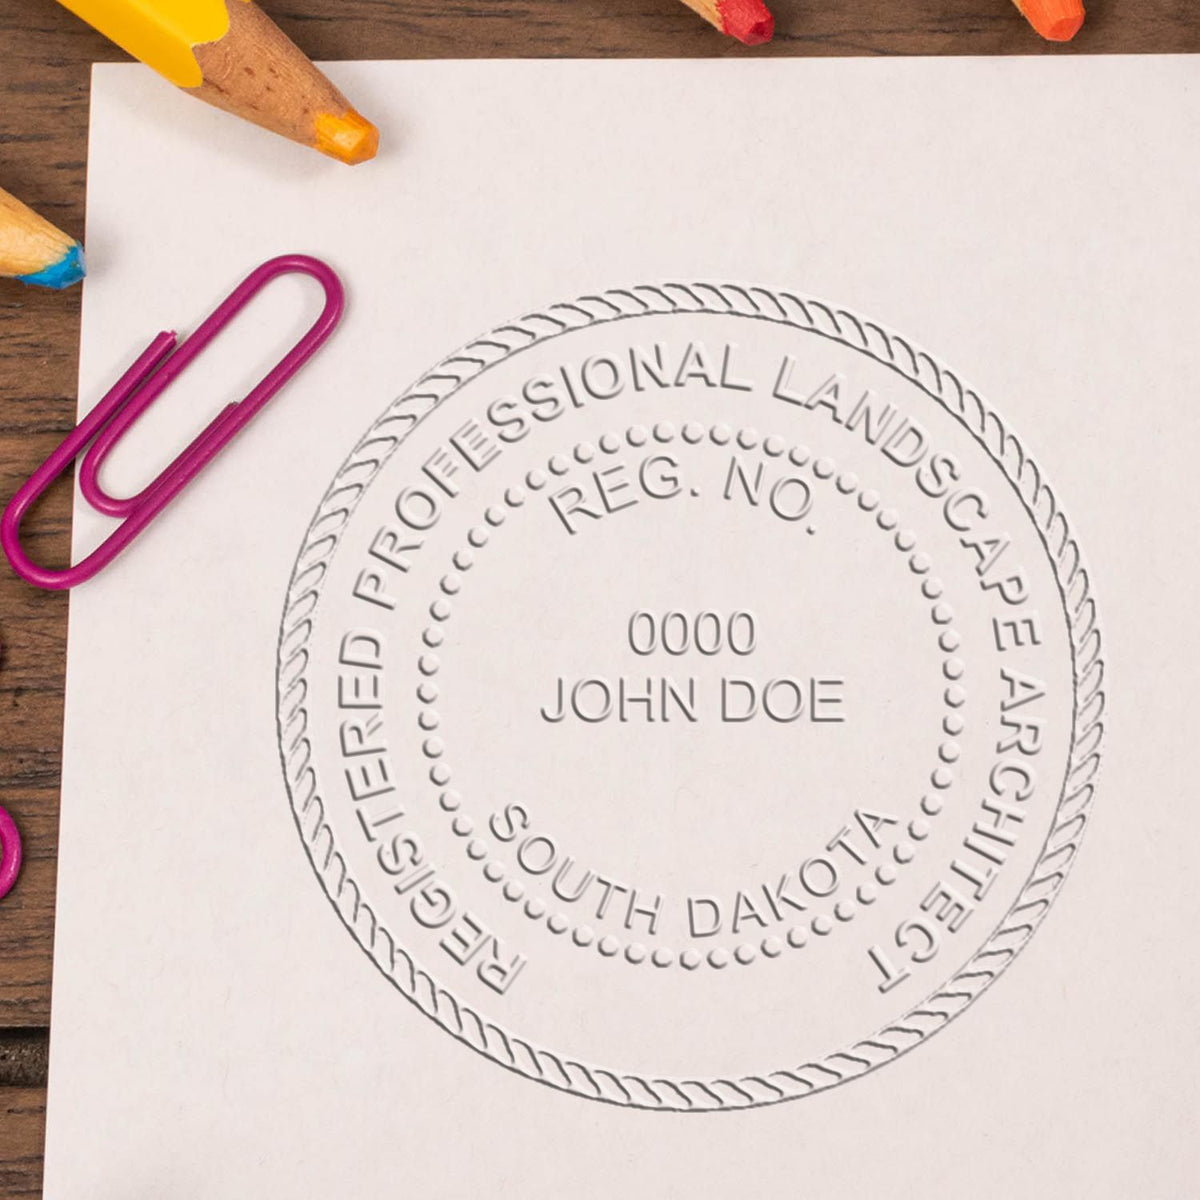 An in use photo of the Hybrid South Dakota Landscape Architect Seal showing a sample imprint on a cardstock